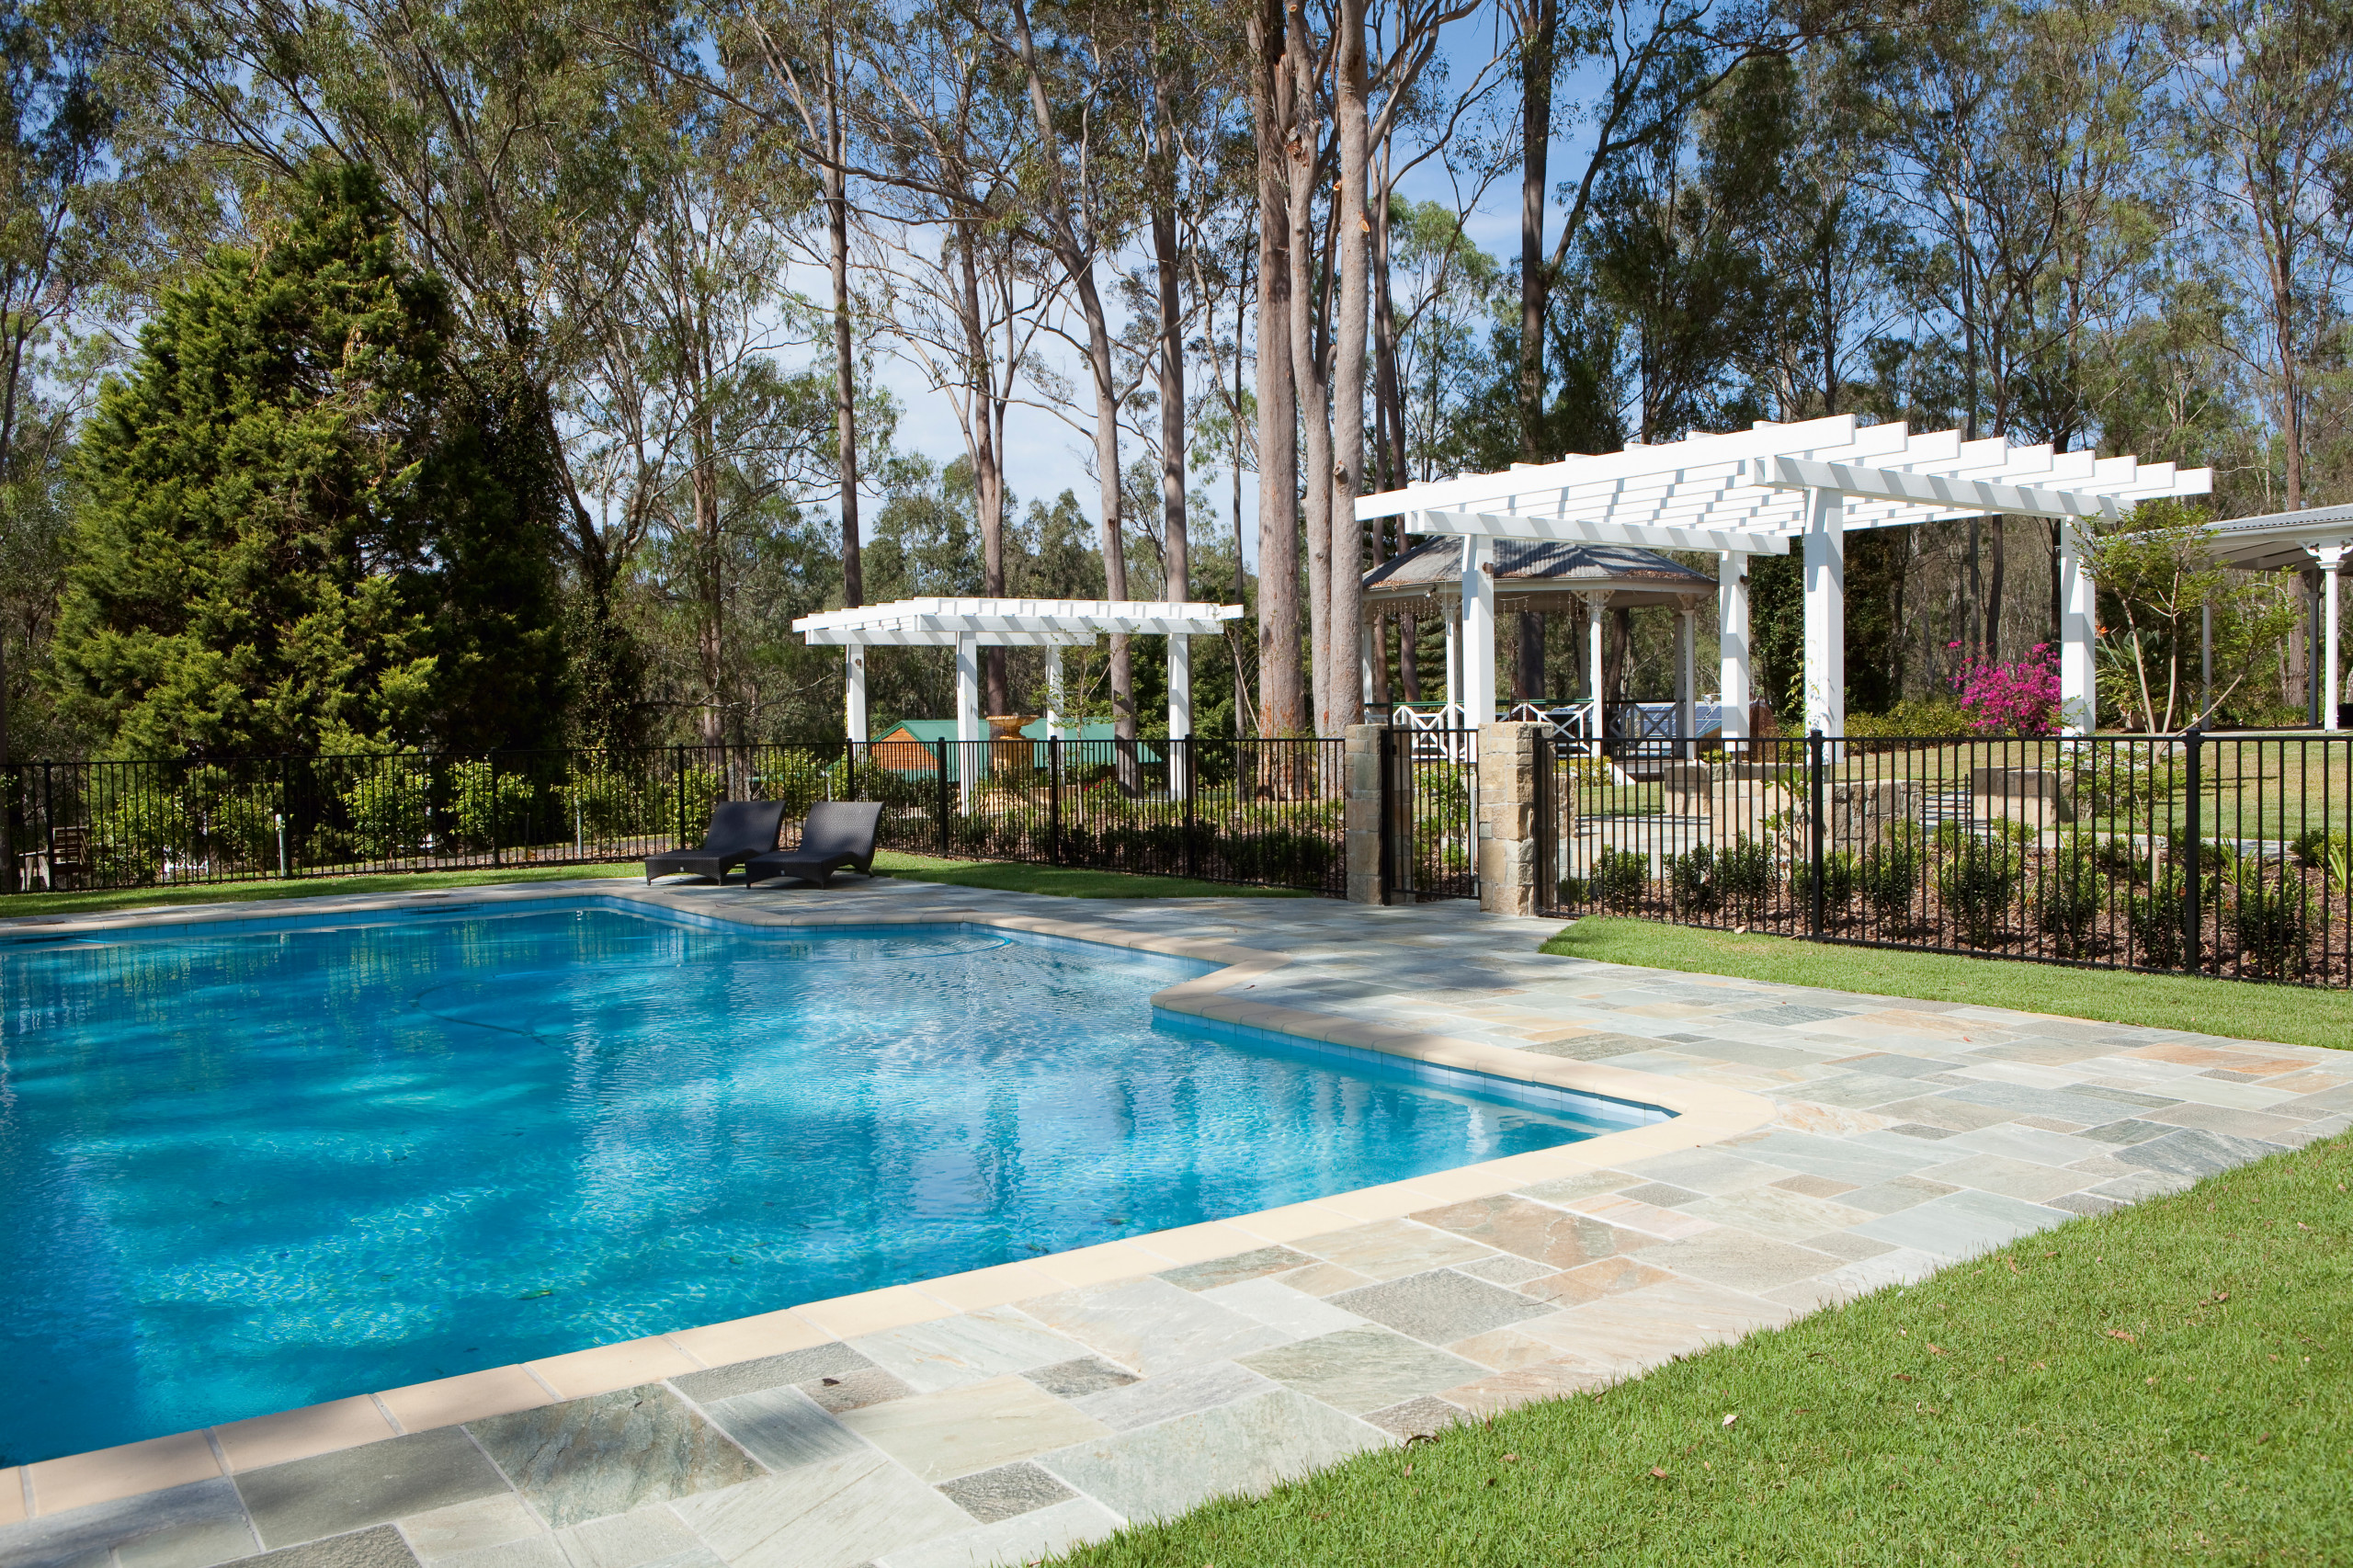 Pullenval Brisbane Pool And Gardens, Pool Renovation And Landscaping Brisbane